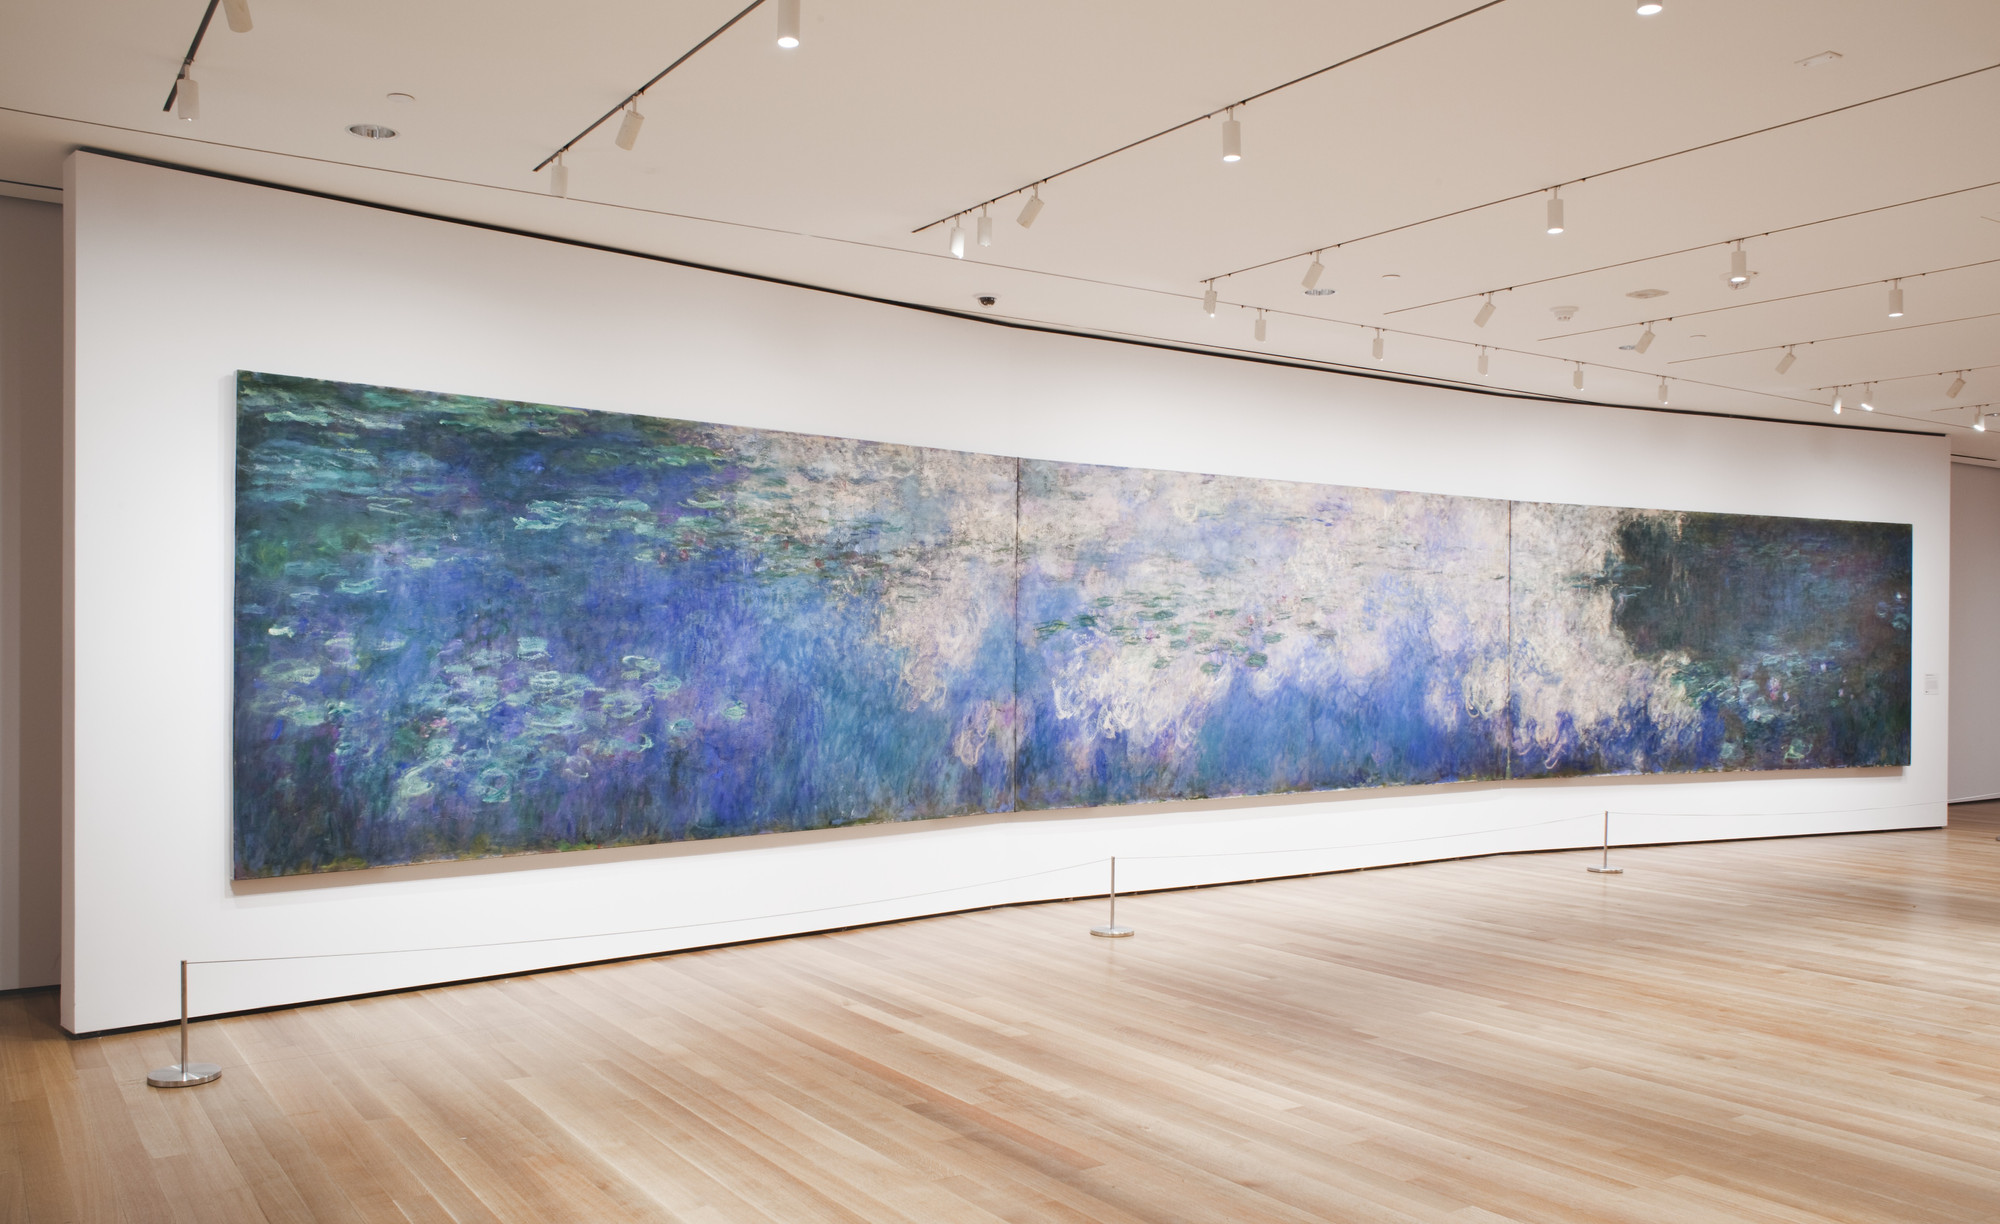 Installation of exhibition, "Monet's Water Lilies" MoMA